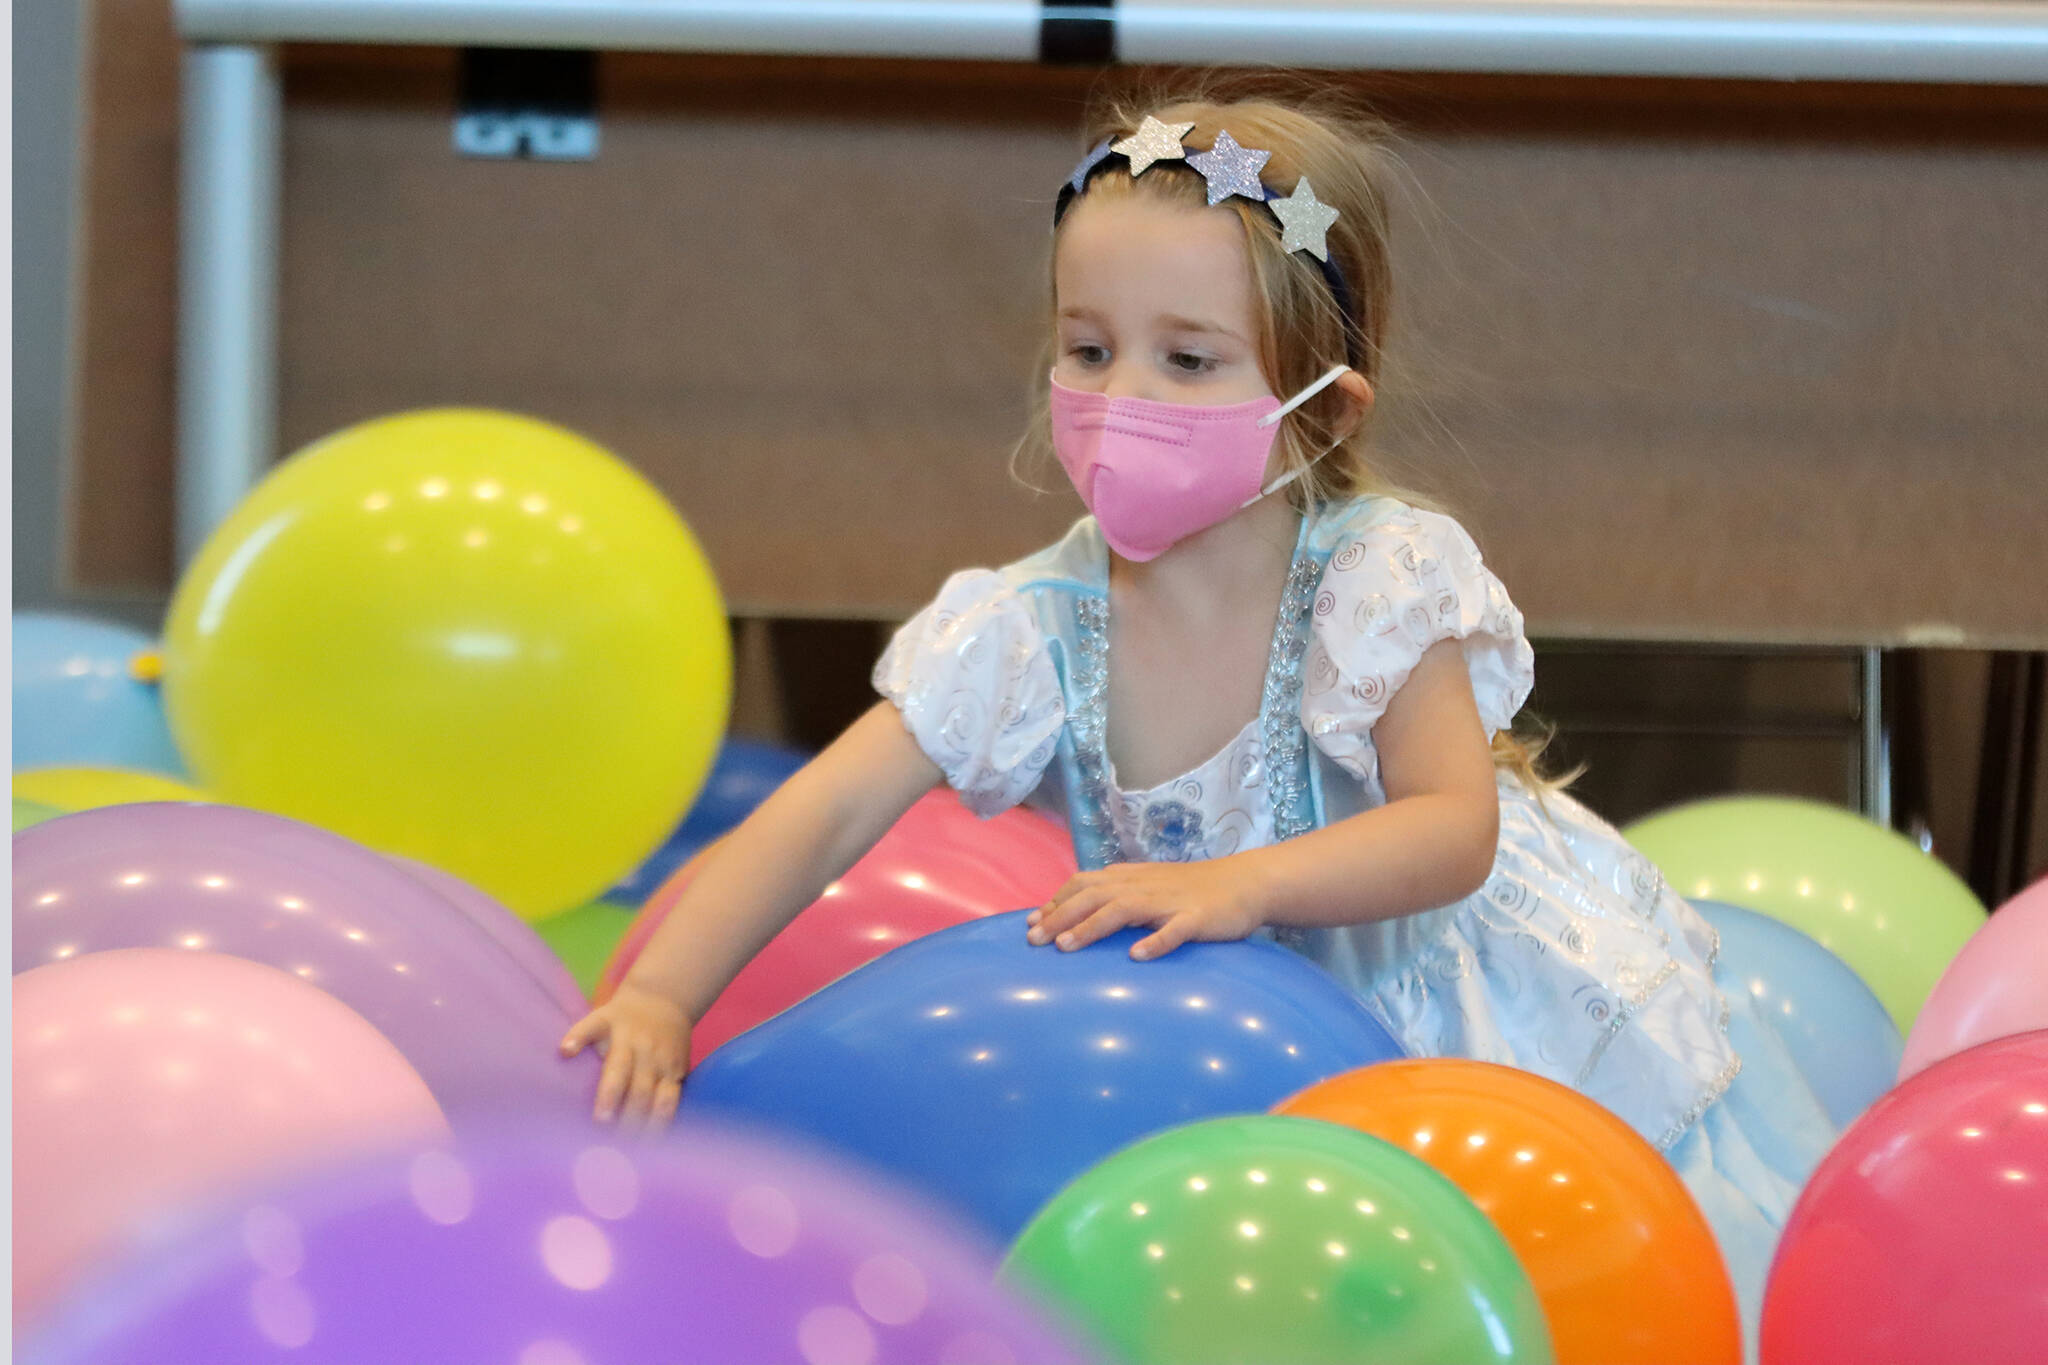 Ava Sell, 3, enjoys balloons left over from a Juneau Dental Society event before Drag Storytime at the Mendenhall Valley Public Library. (Ben Hohenstatt / Juneau Empire)